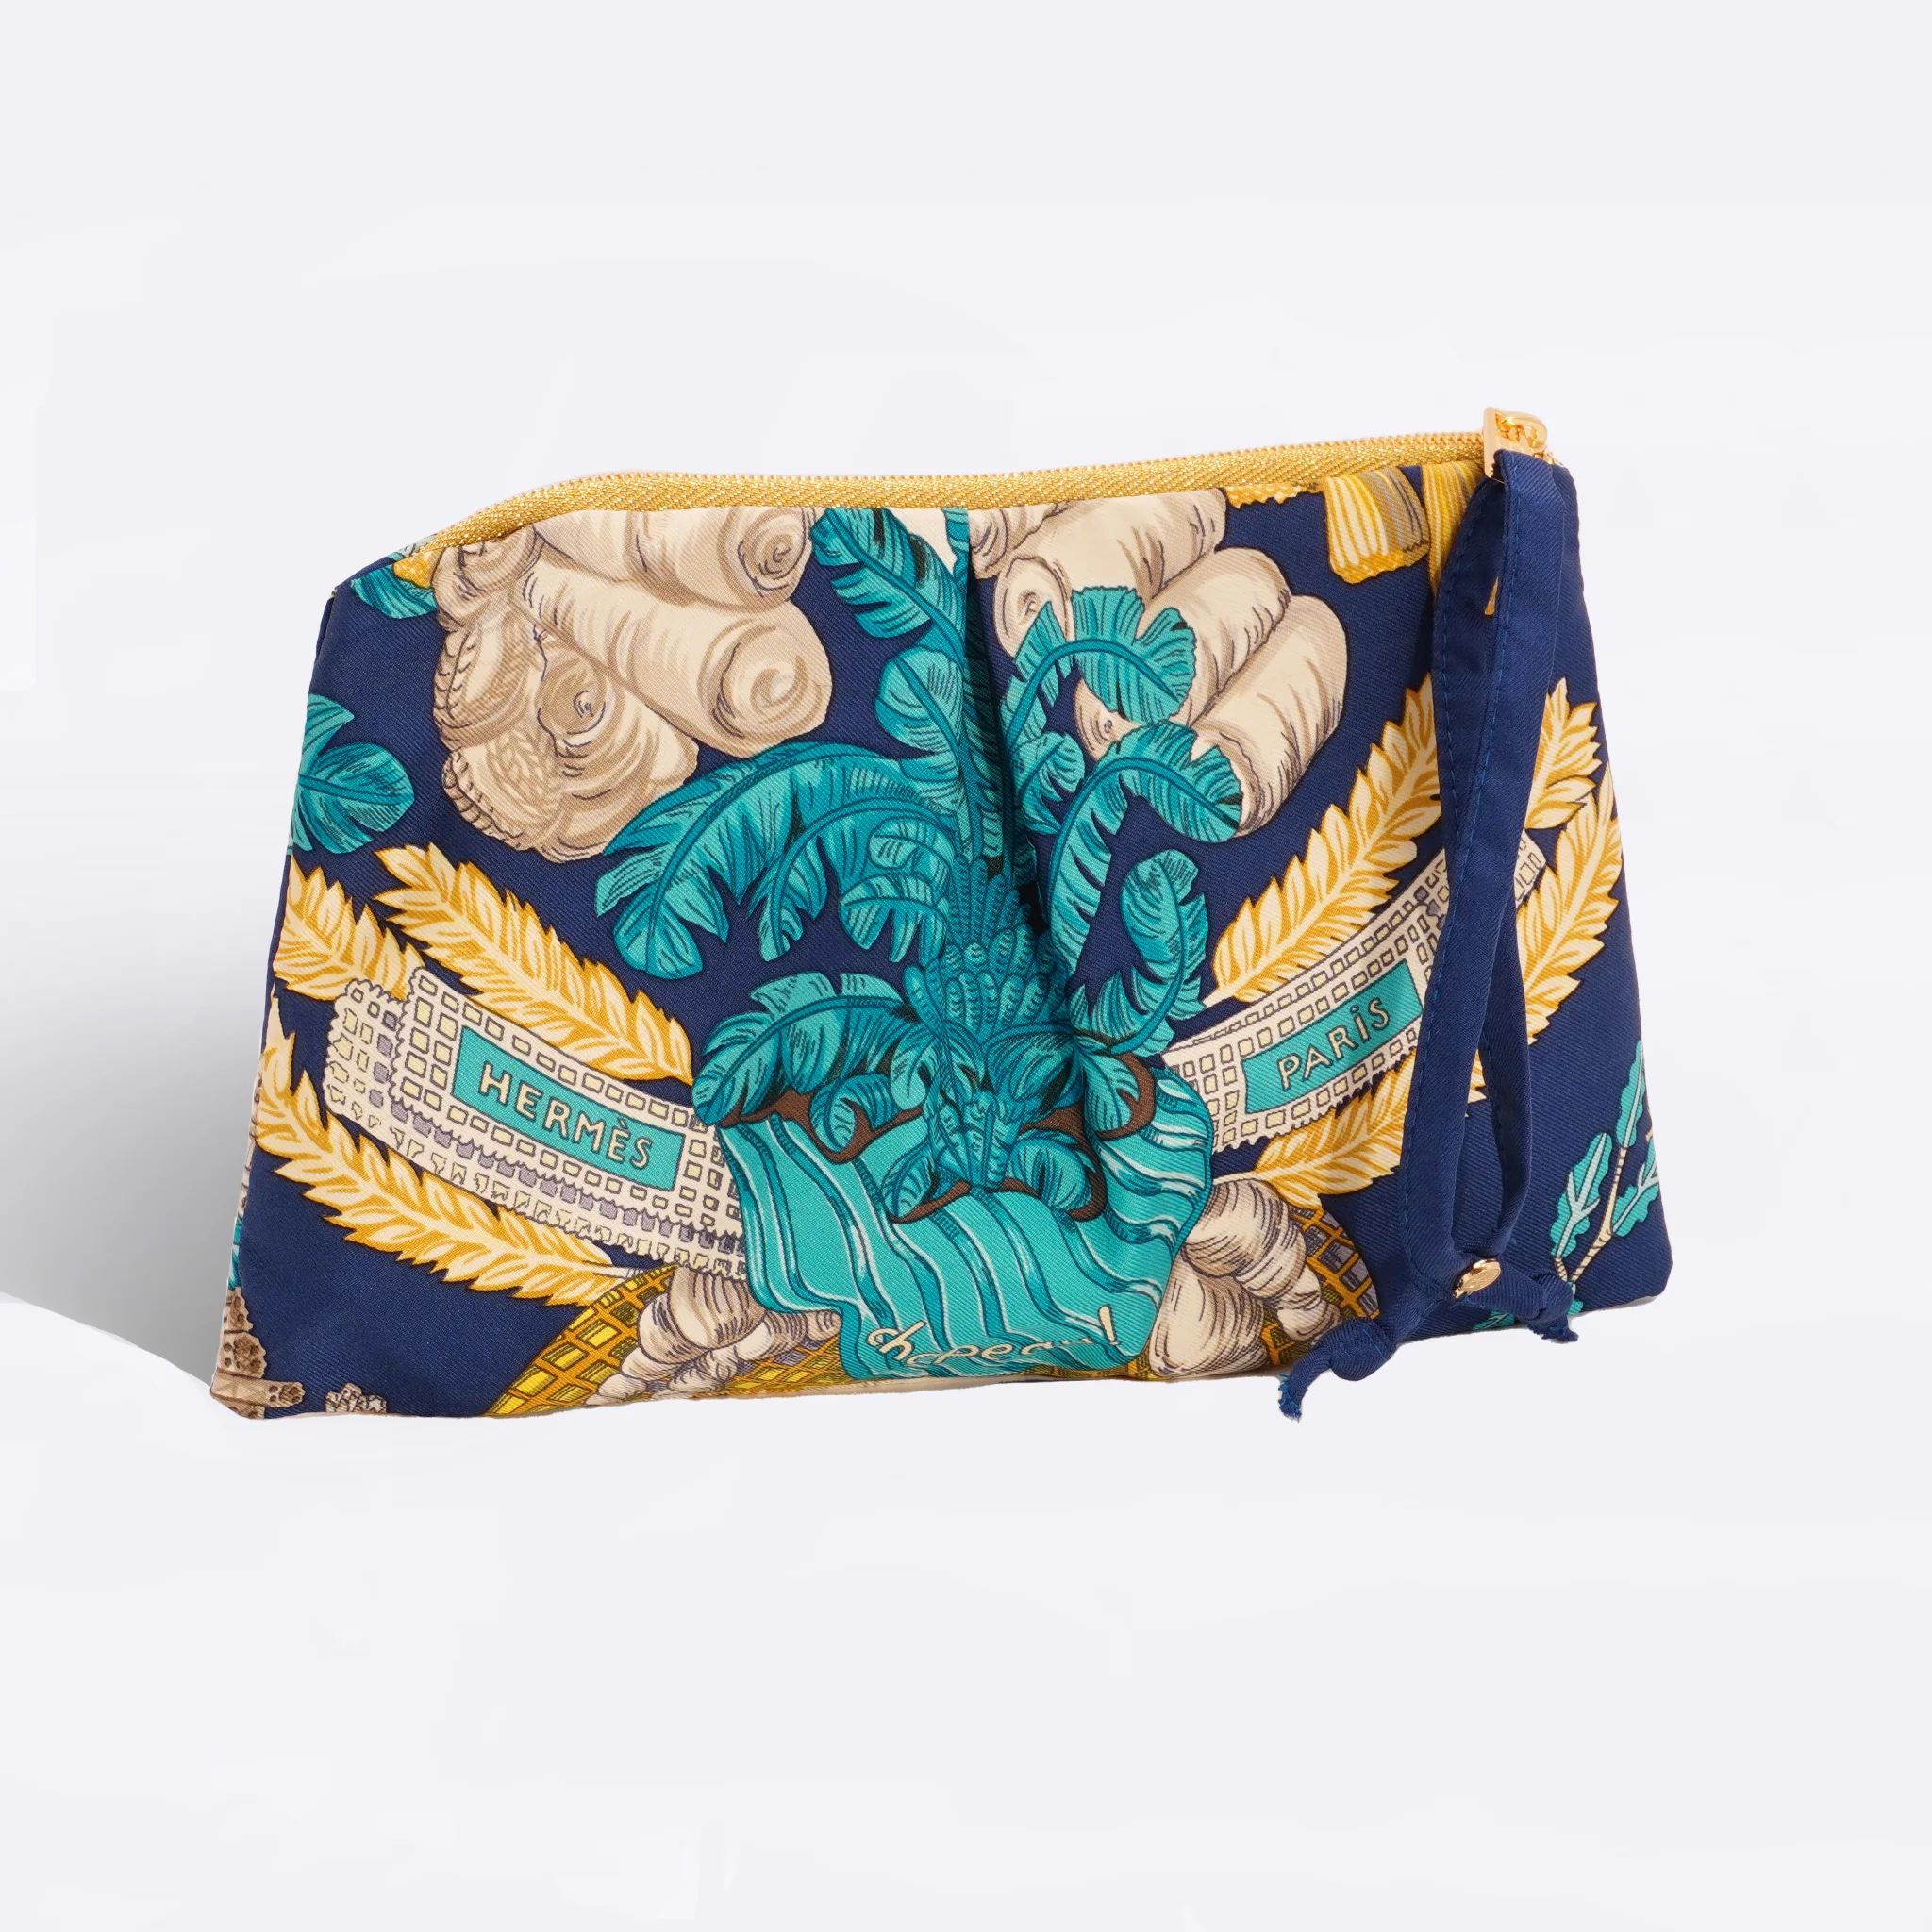 "Chapeau" Scarf Bag (Upcycled from Hermes Scarf) | Hampton Road Designs